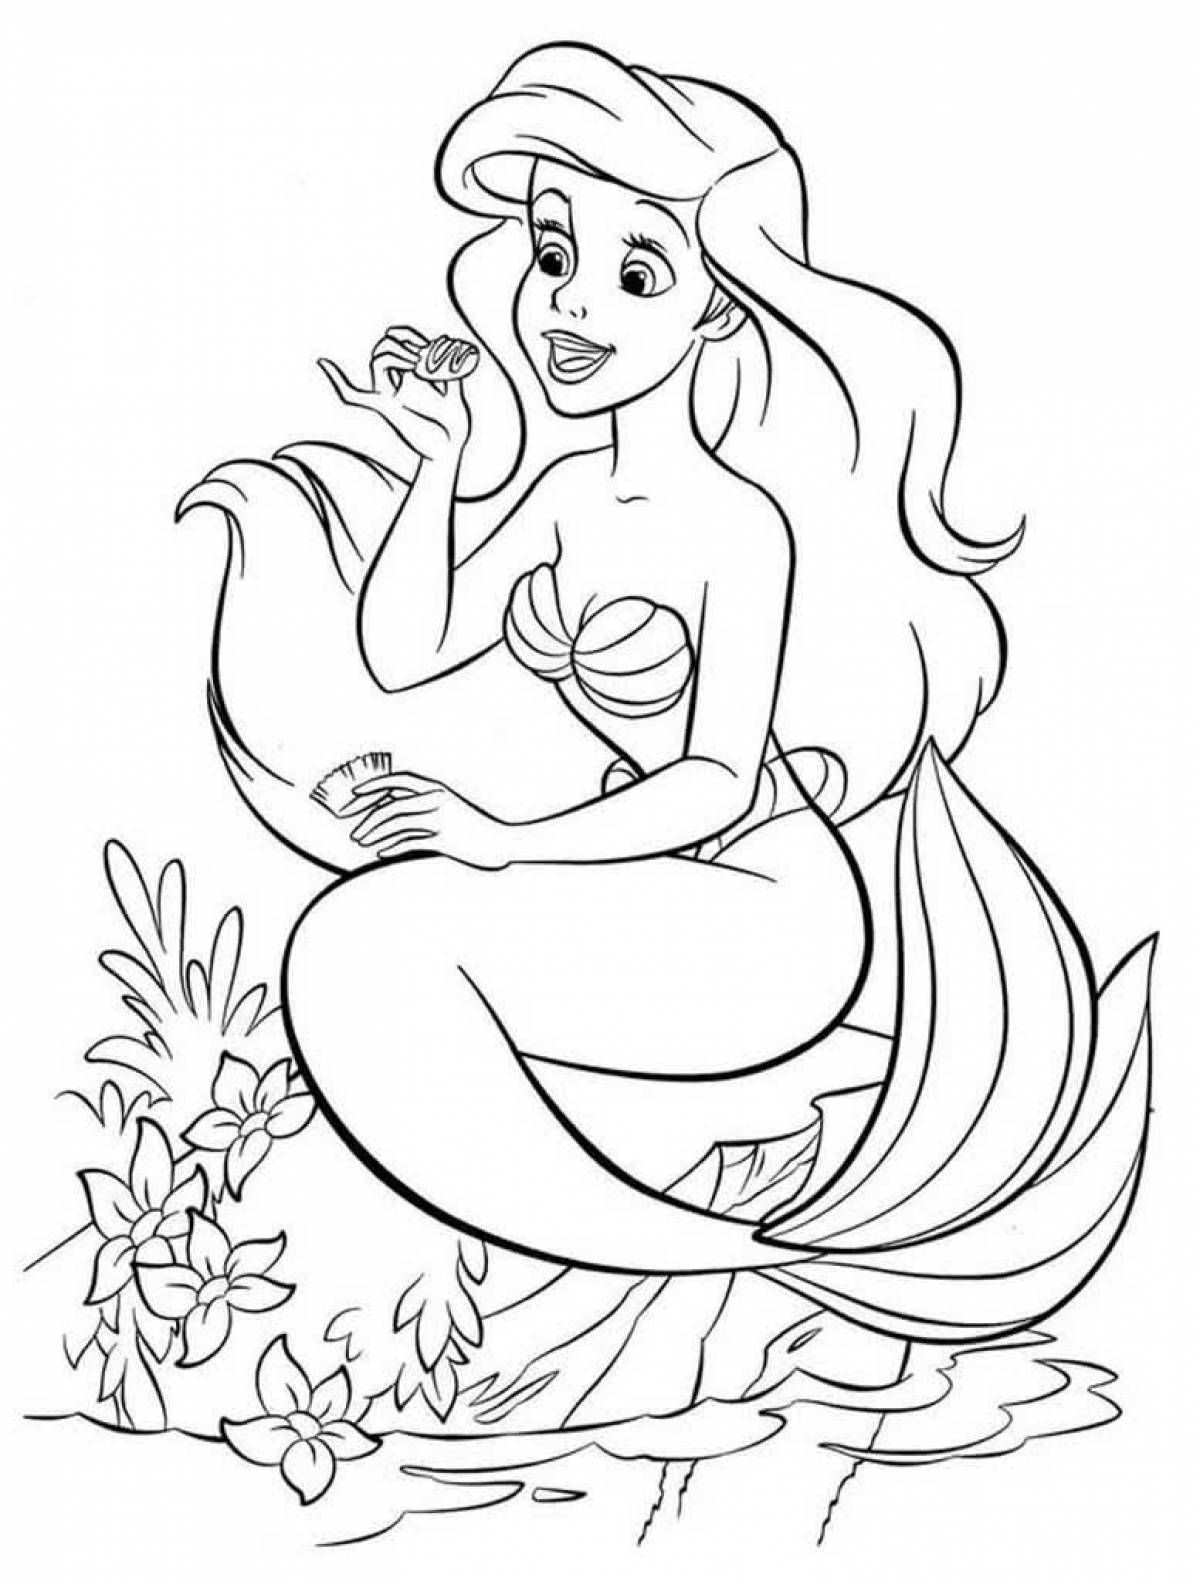 Coloring page charming mermaid